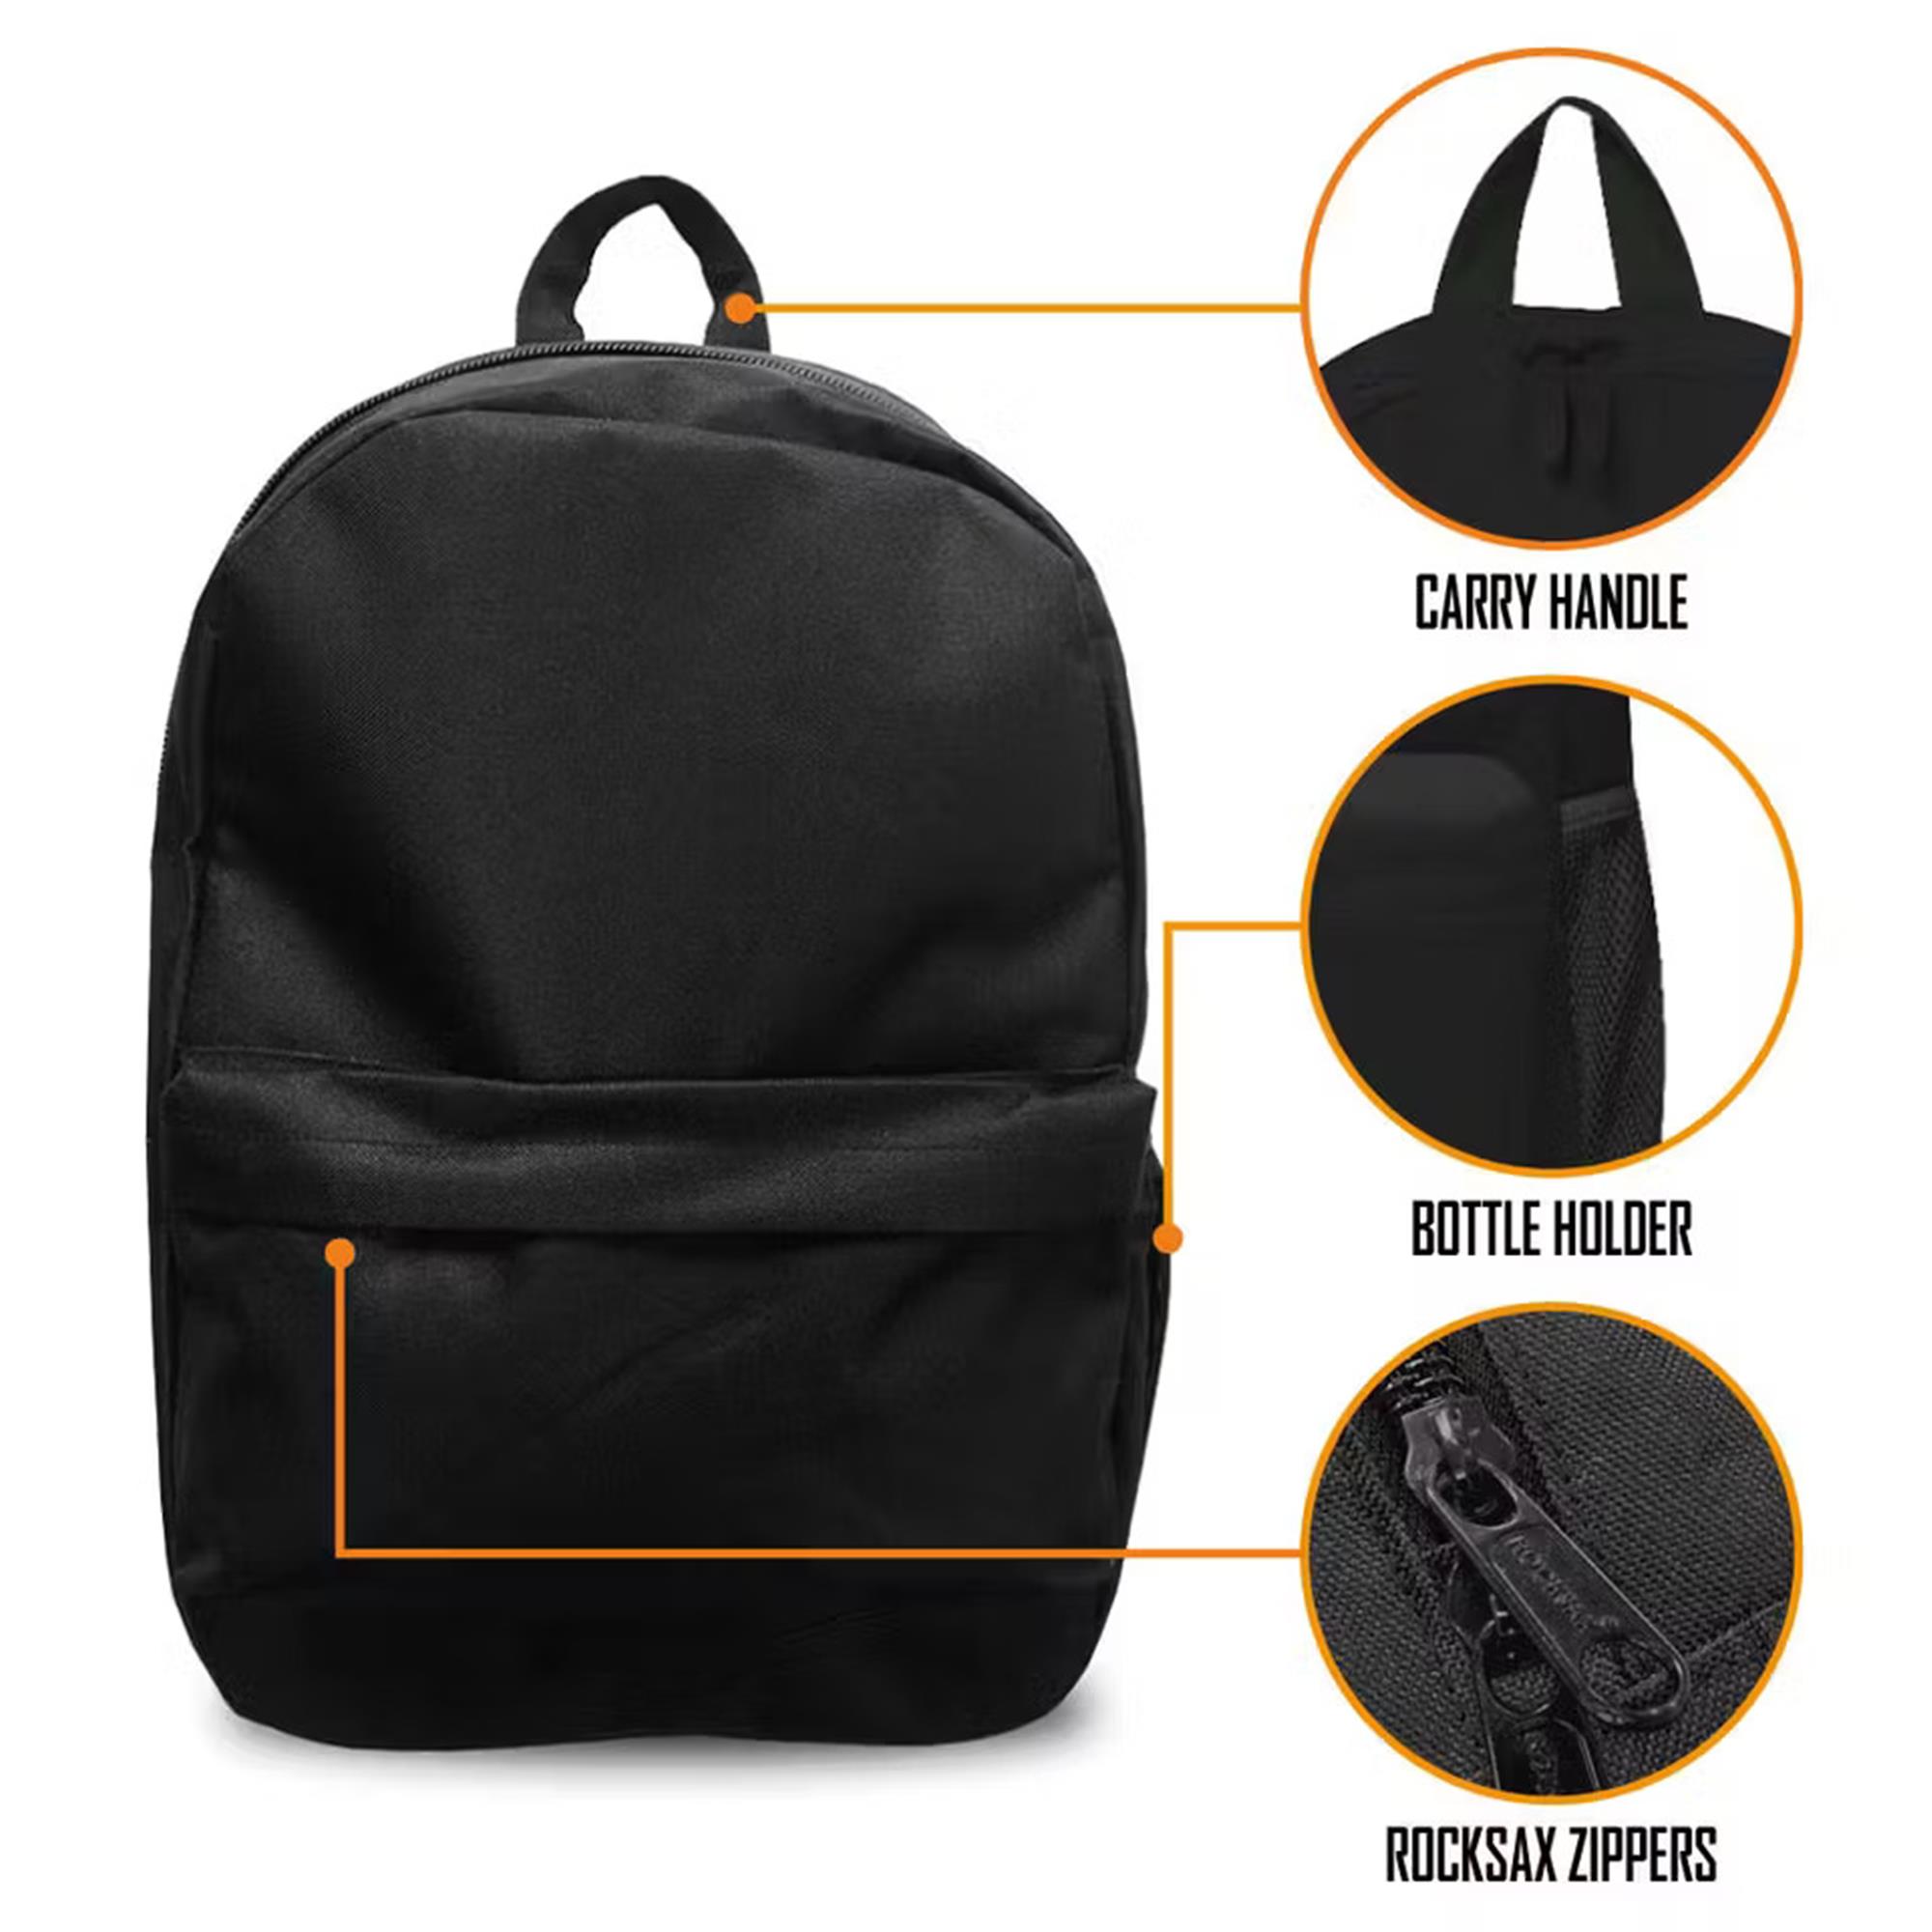 The Way of the Fist Daypack